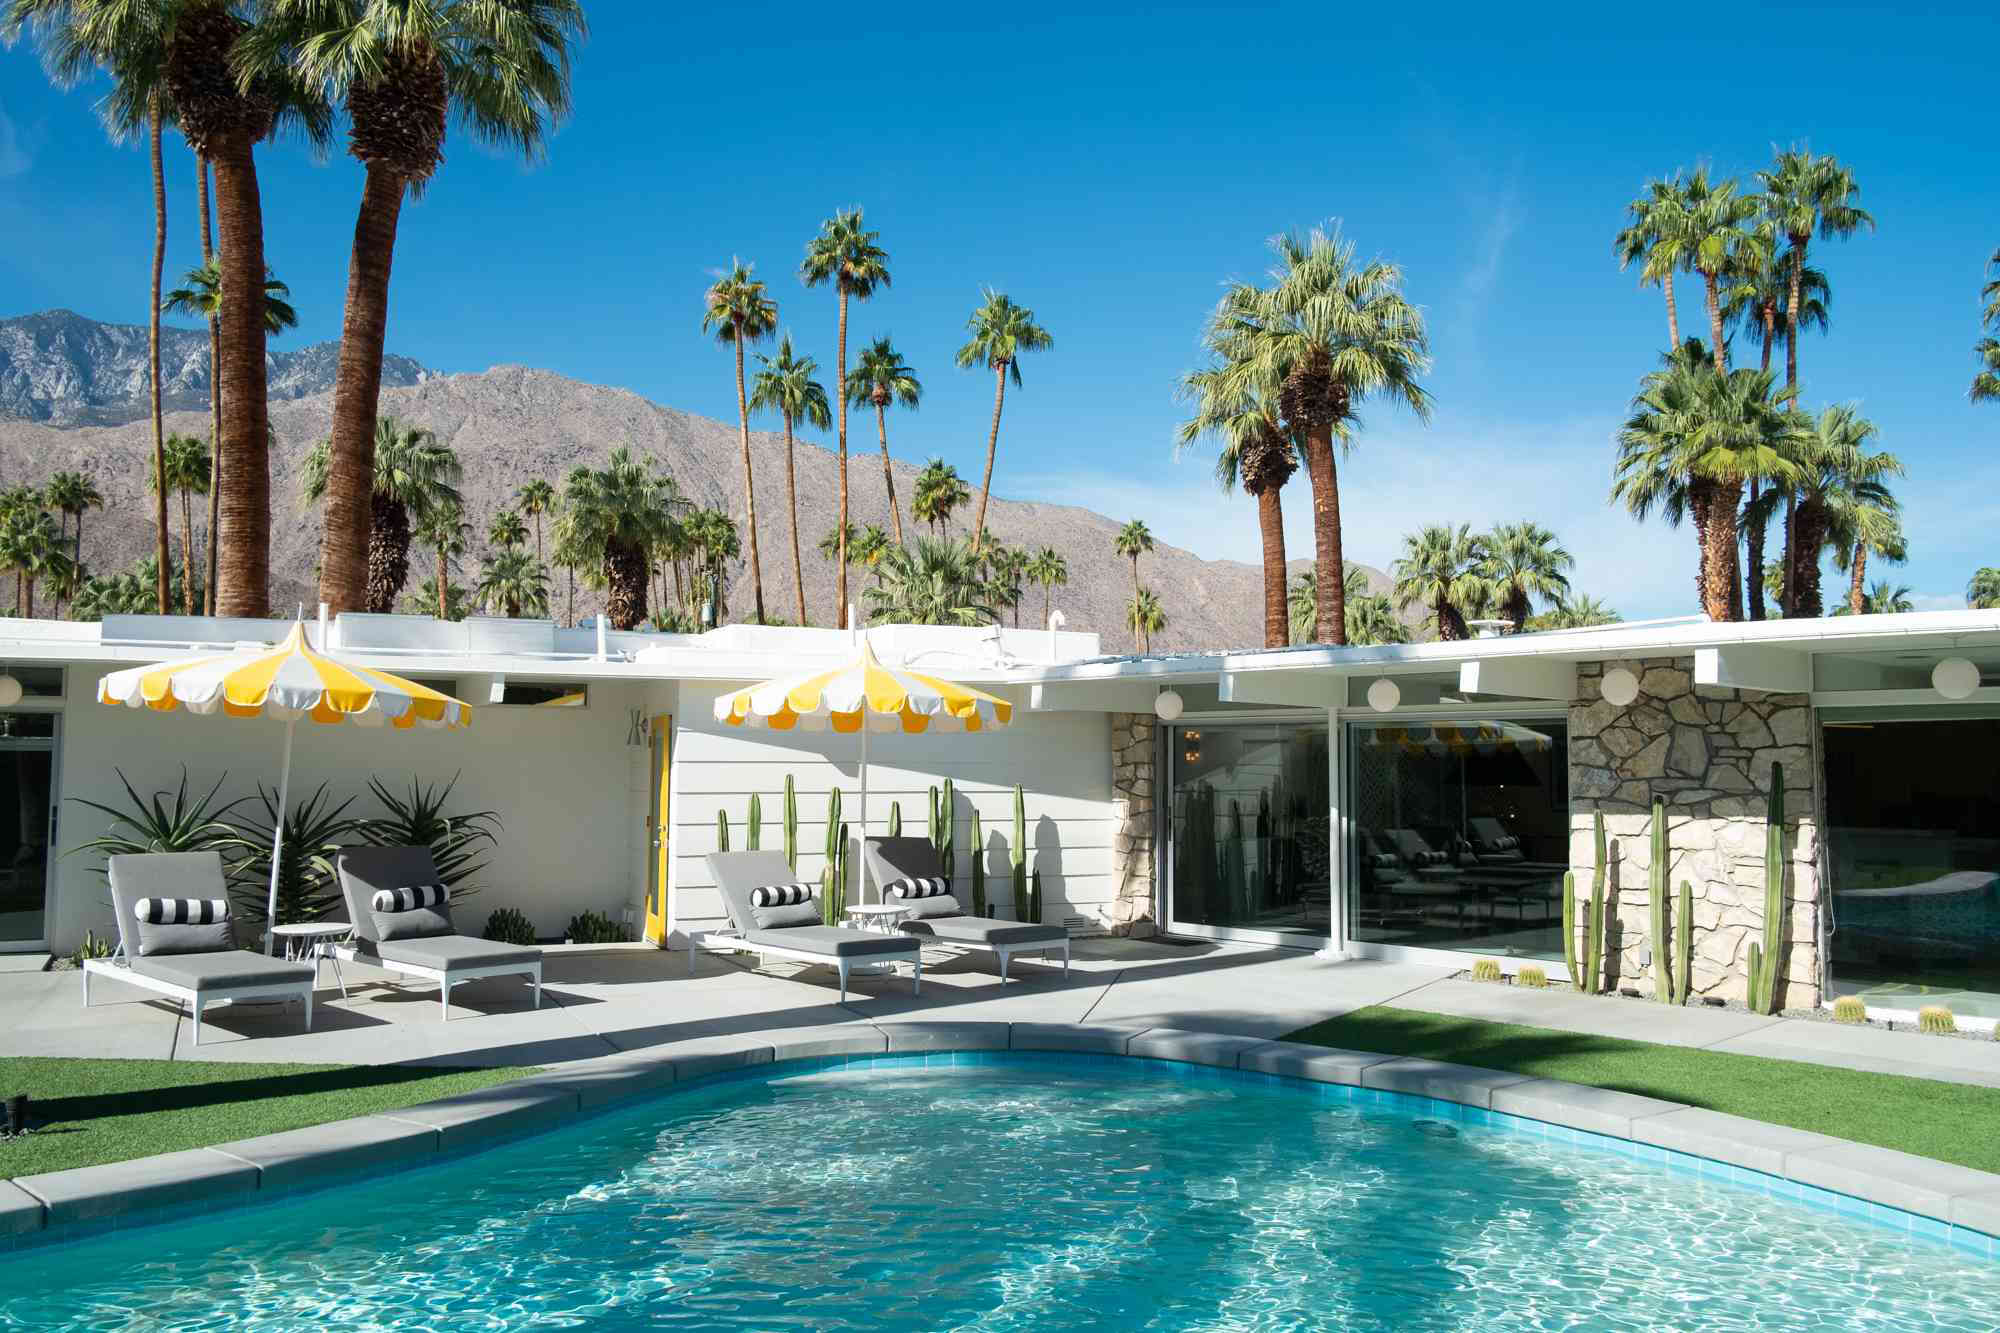 19 Best Things to Do in Palm Springs, California